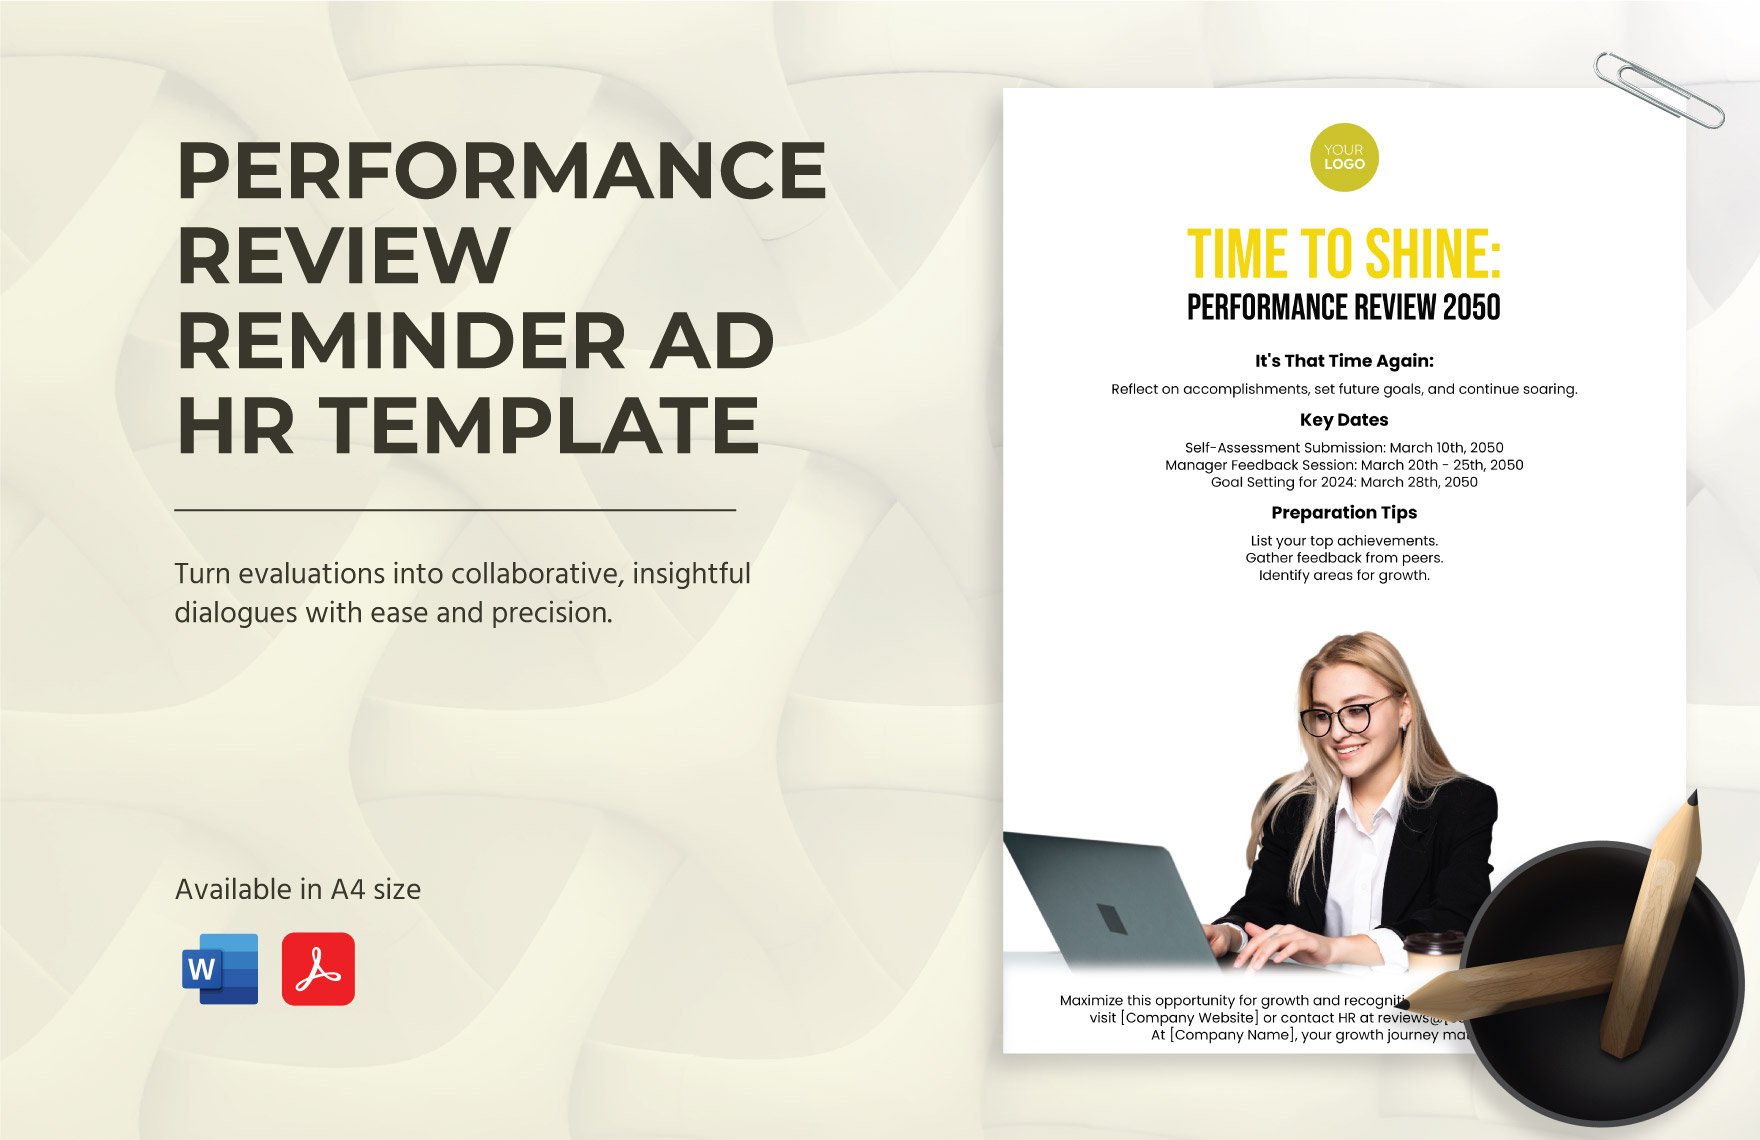 Performance Review Reminder Ad HR Template